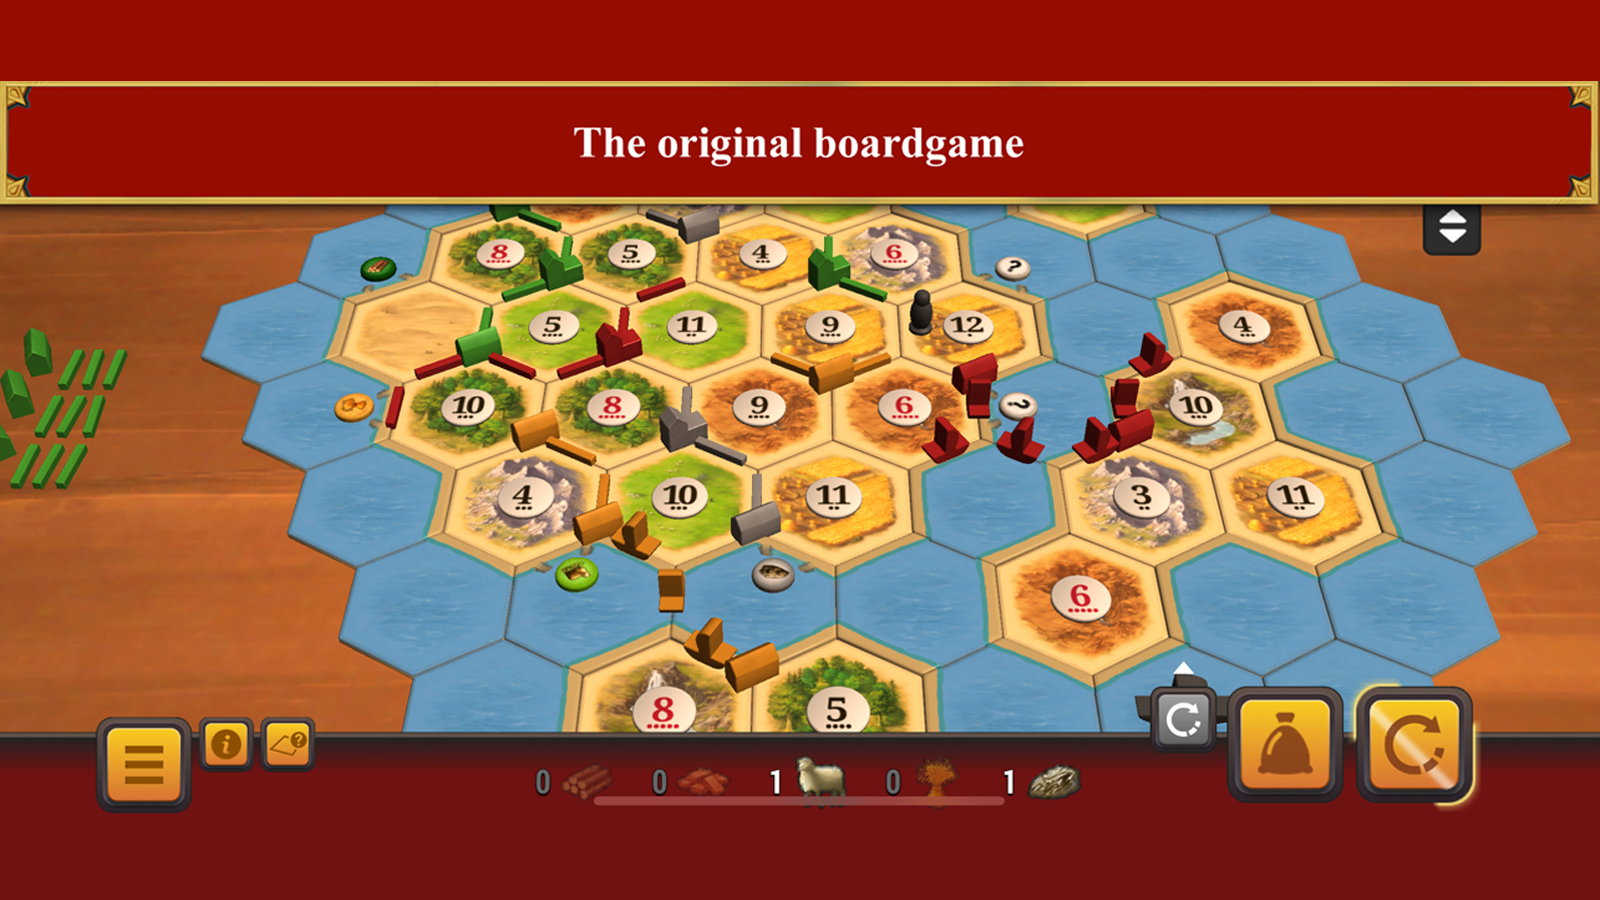 Catan gameplay with player settlements and resource cards